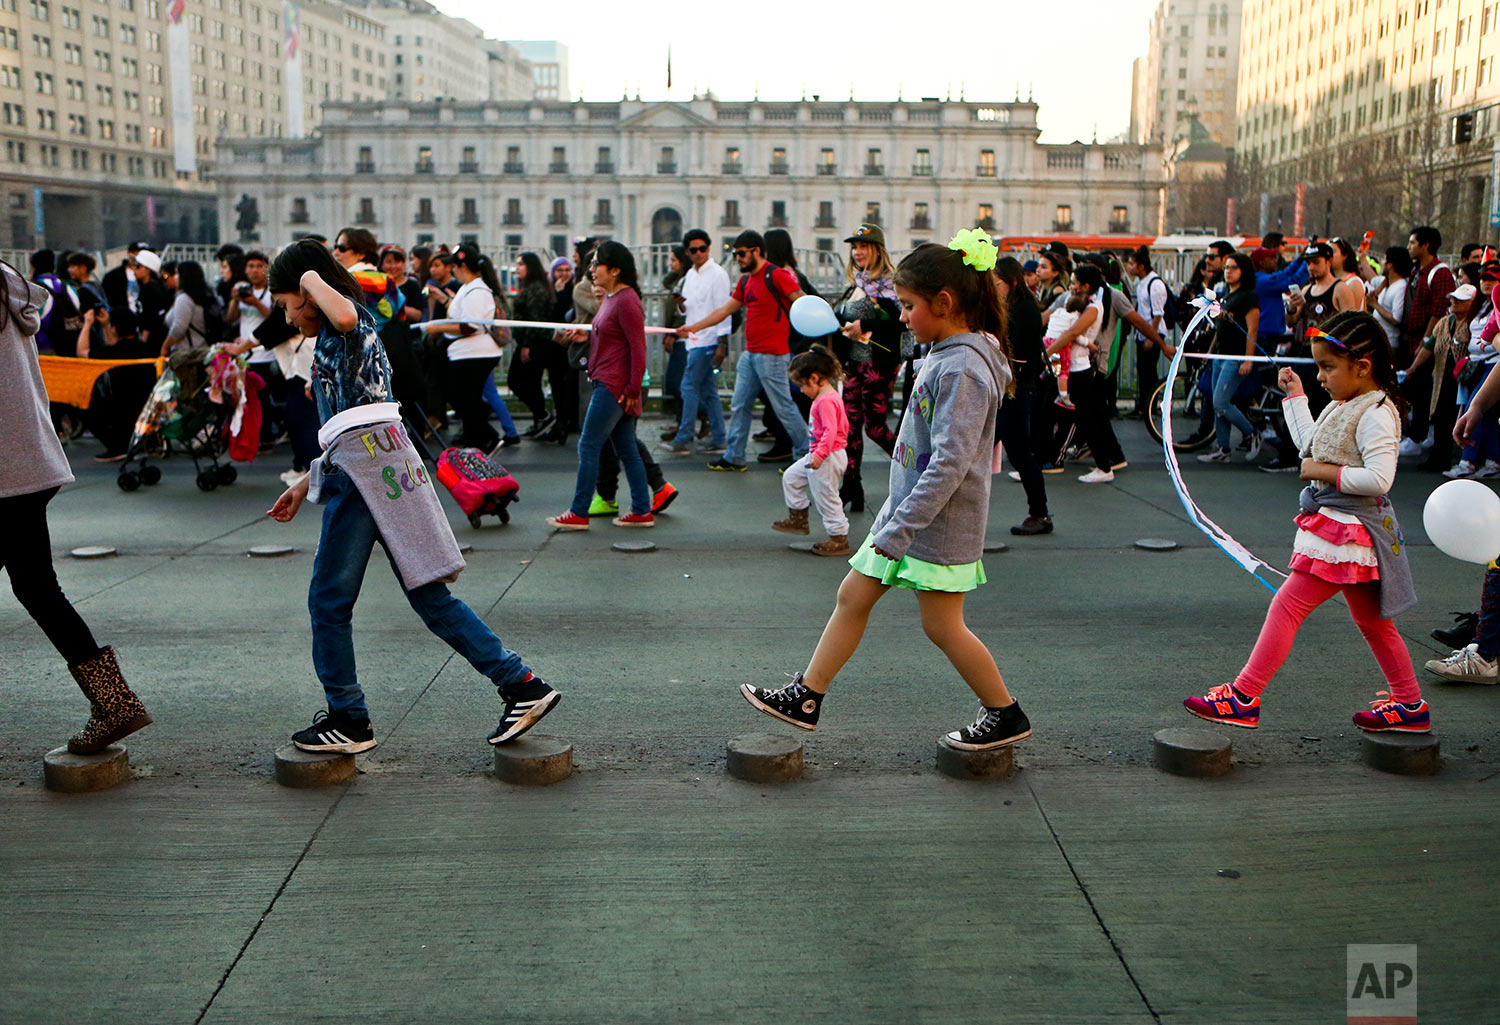  In this July 1, 2017 photo, transgender girls Selenna, center right, and Mathilda, far right, walk on street stumps with other children outside La Moneda government palace during a Gay Pride march in Santiago, Chile. The government is backing a bill